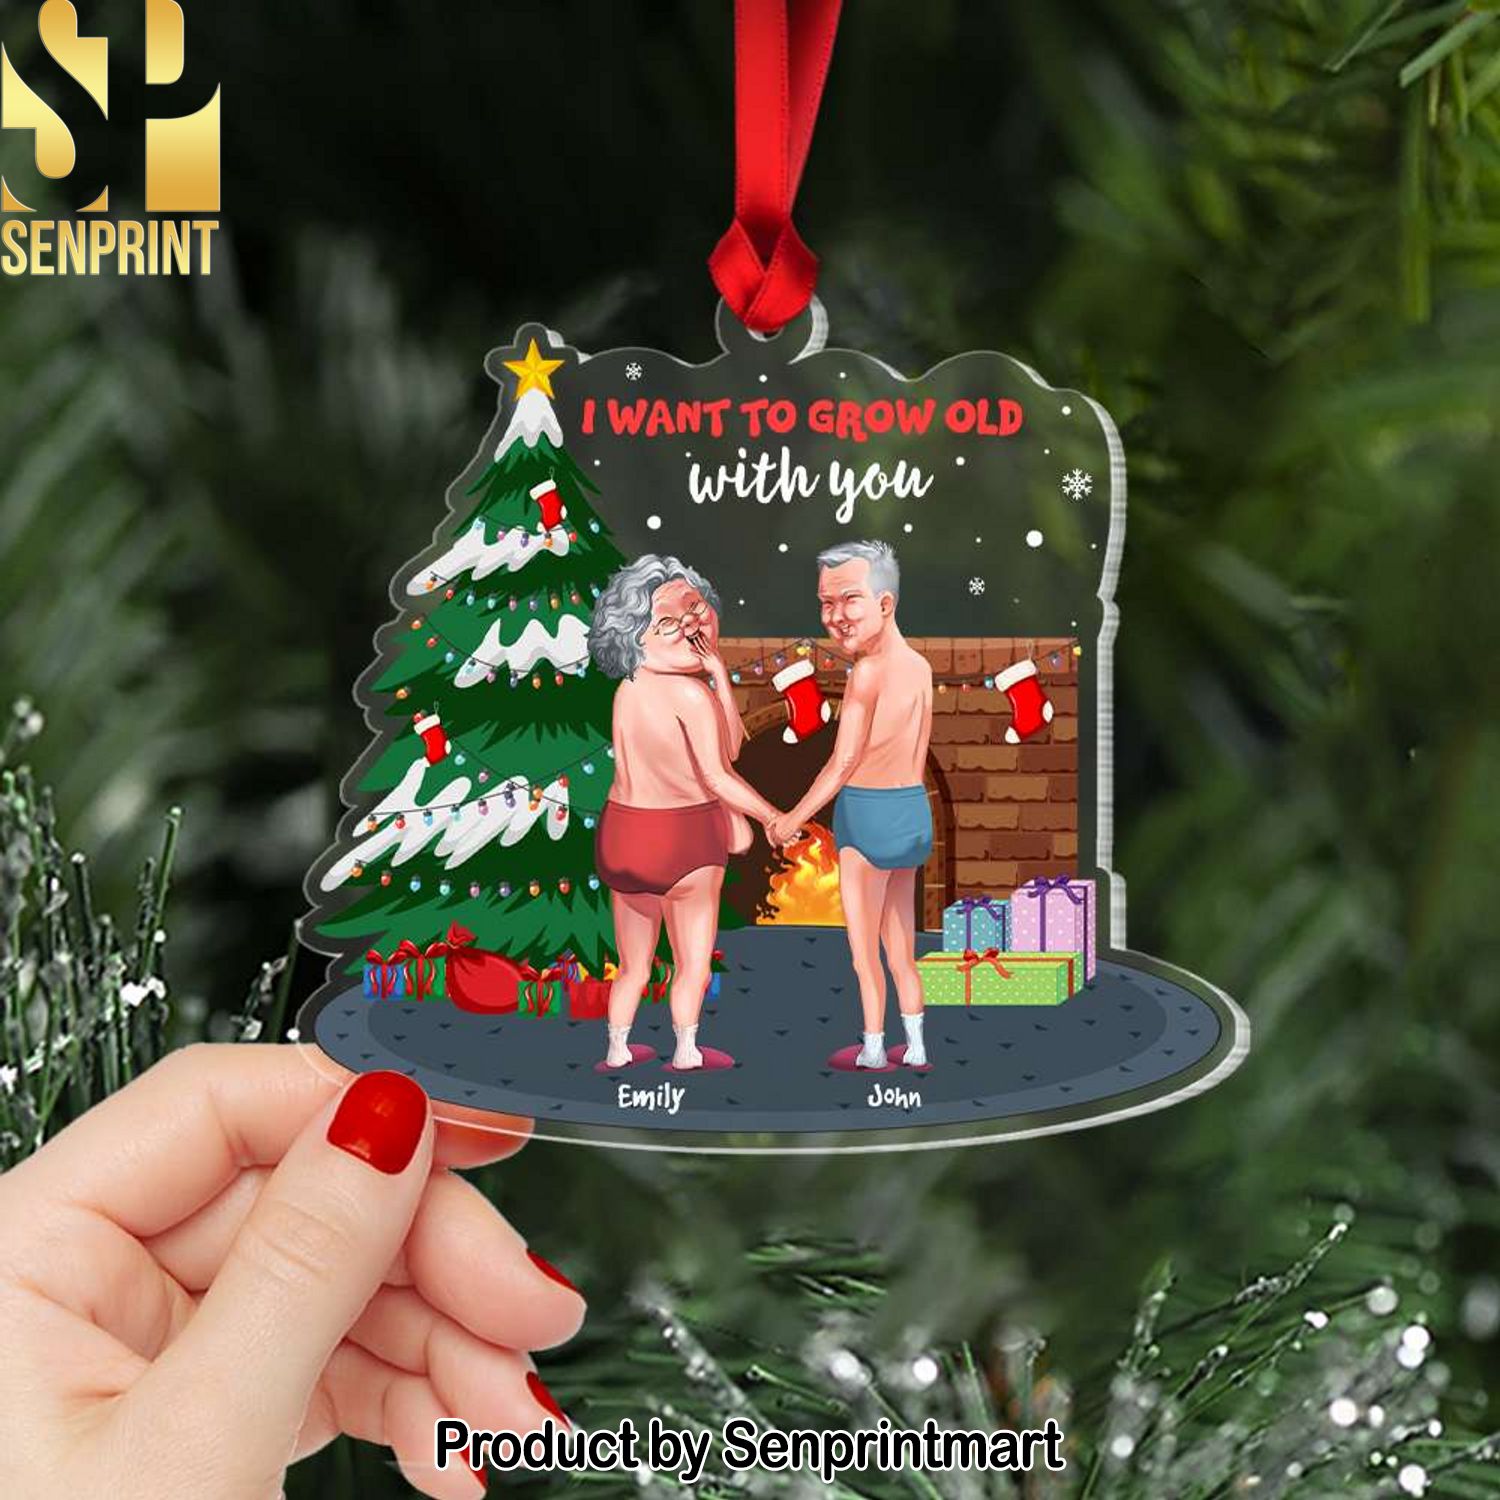 I Want To Grow Old With You, Couple Gift, Personalized Acrylic Ornament, Old Couple Ornament, Christmas Gift